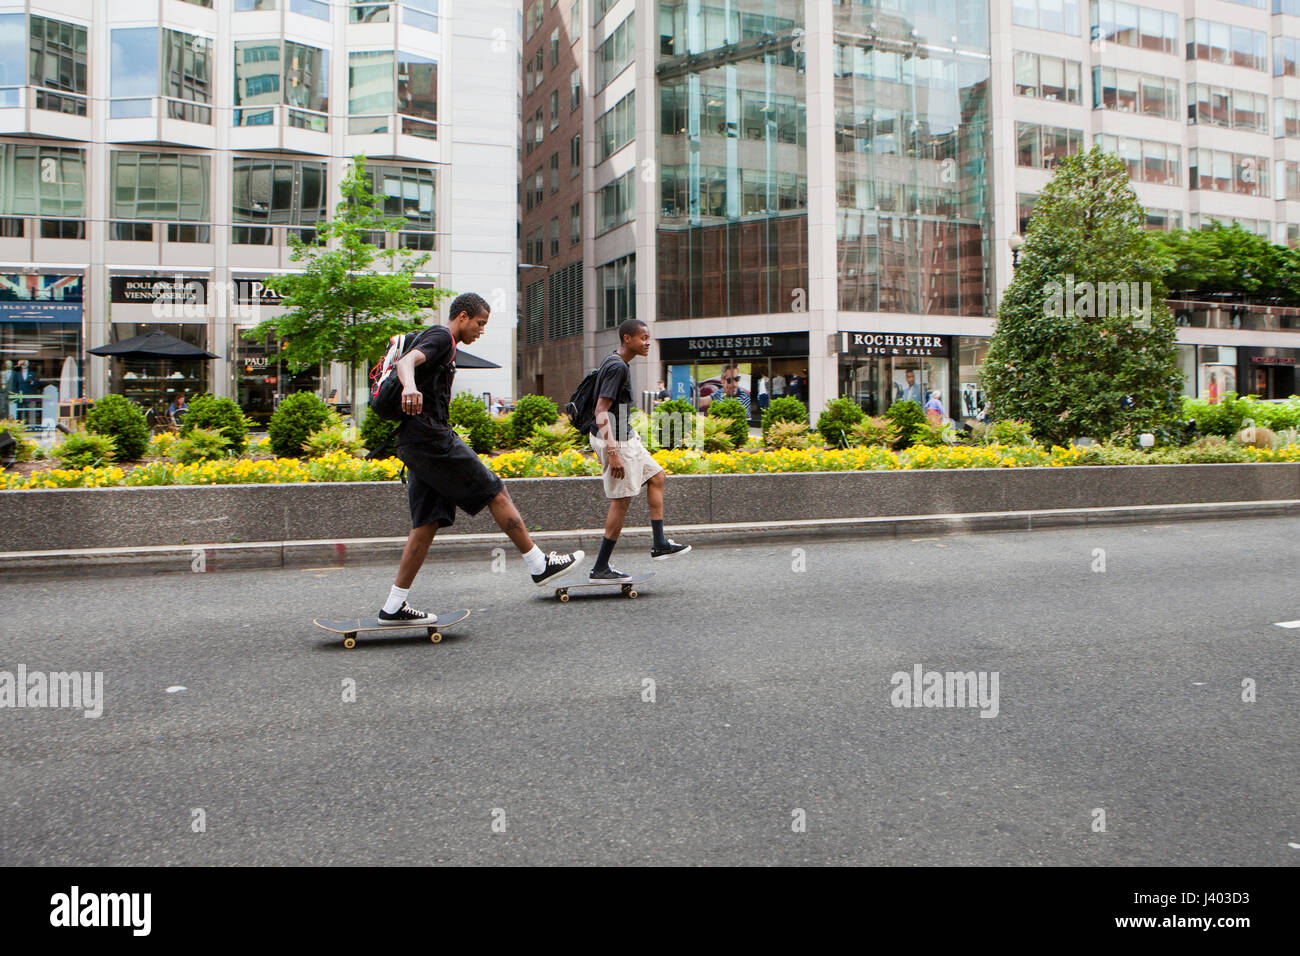 Young skateboarders riding in city street - USA Stock Photo